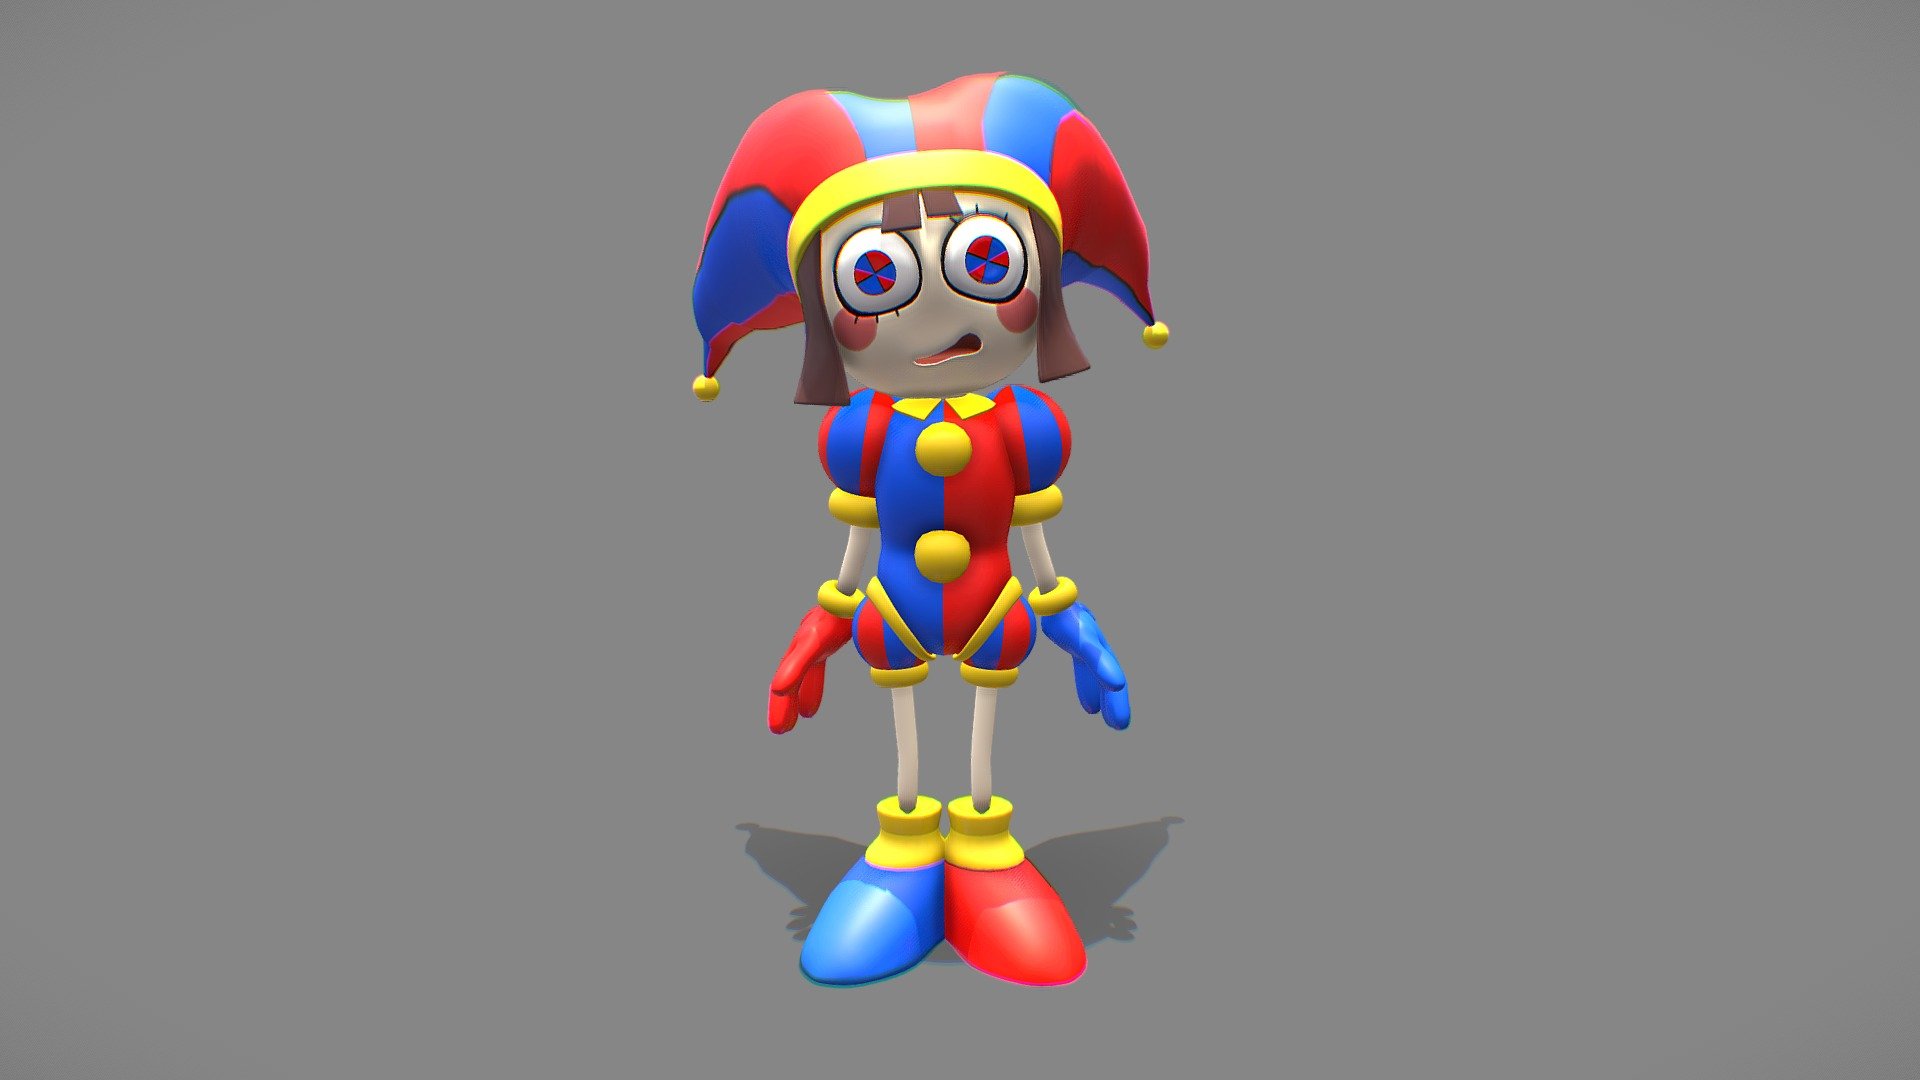 It's XDDCC! Erm&hellip; no, that's terrible. What do you think of, Pomni? - Pomni - The Amazing Digital Circus - 3D model by camad203 3d model